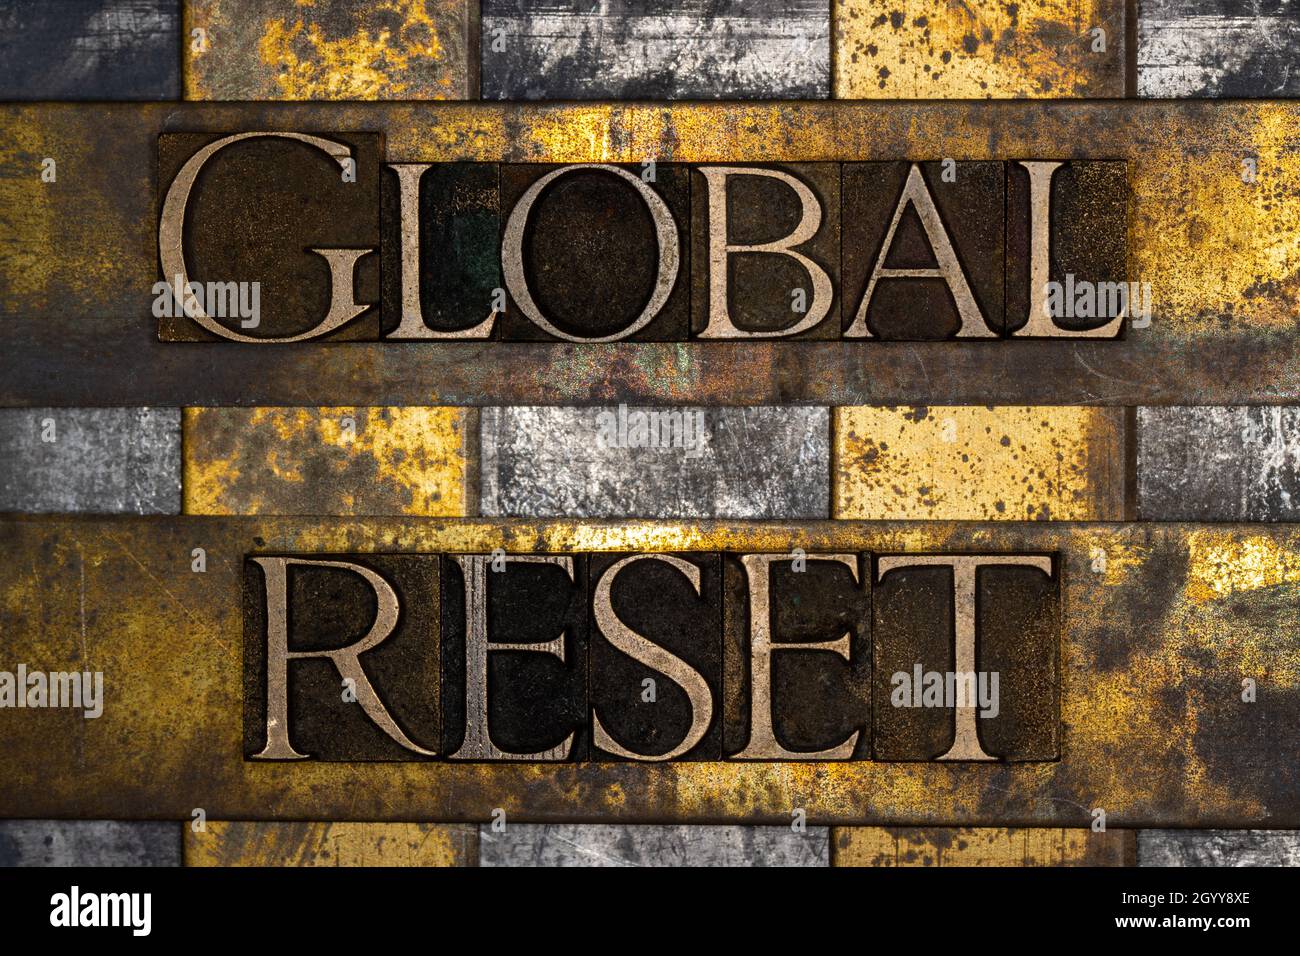 Global Reset text on textured grunge copper and vintage gold background Stock Photo